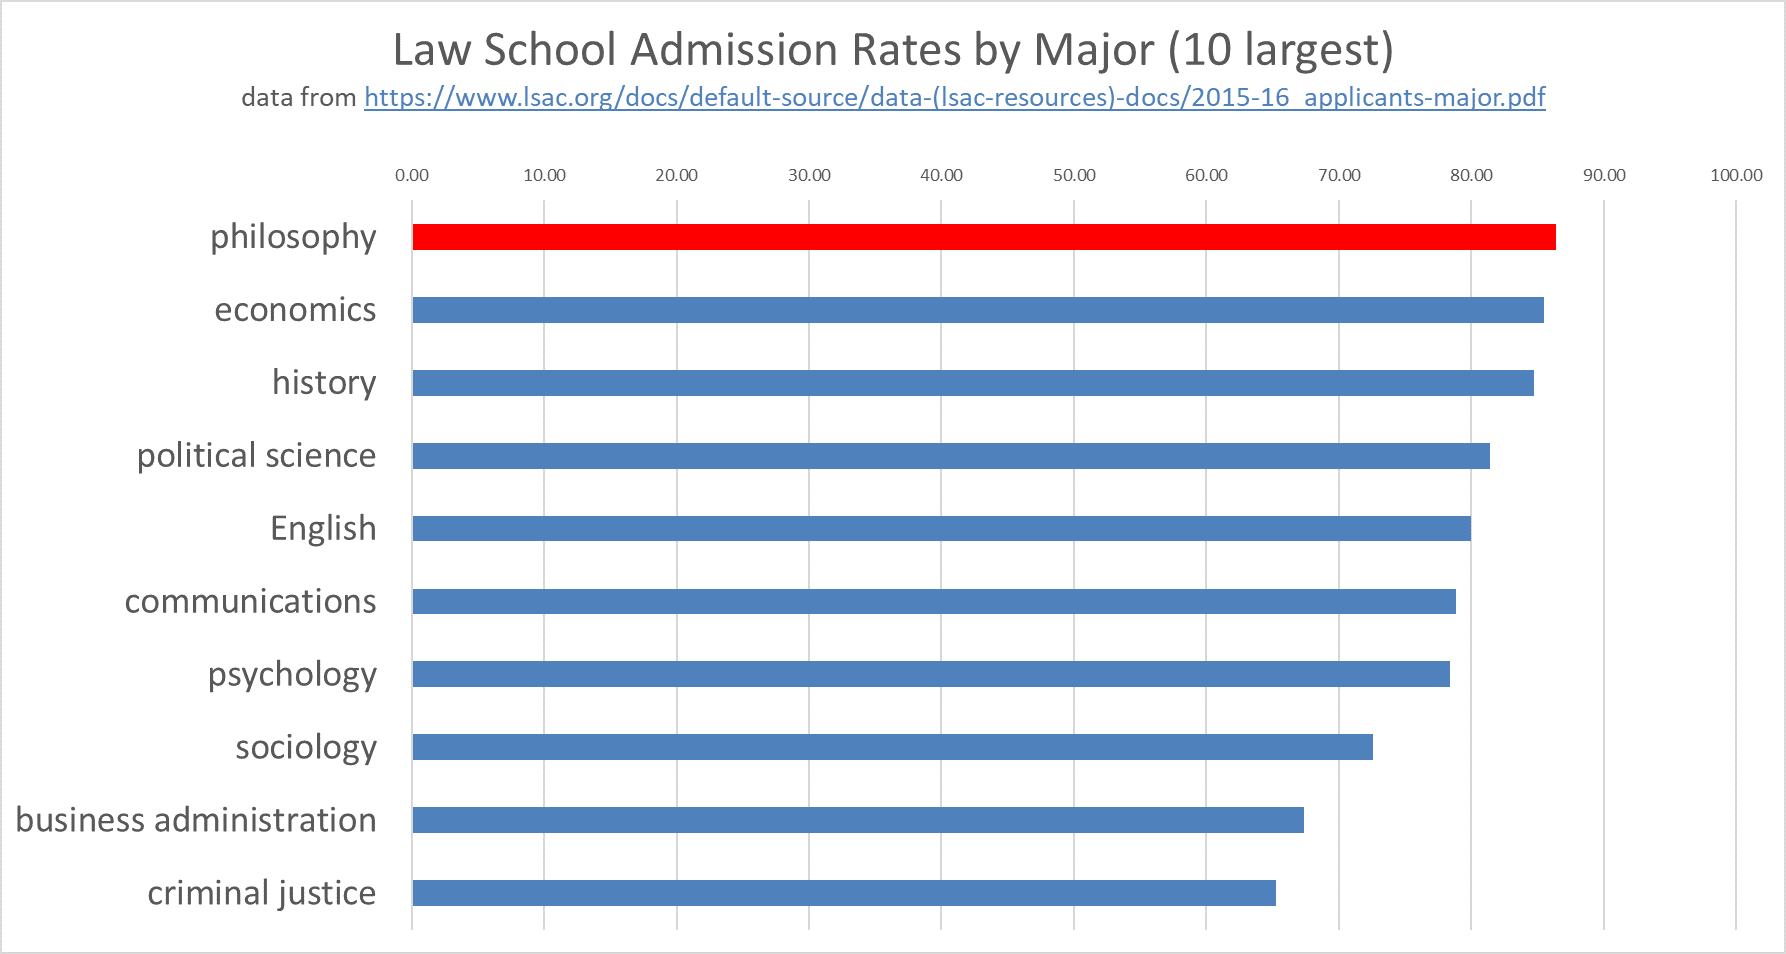 Rate of law school admission by major